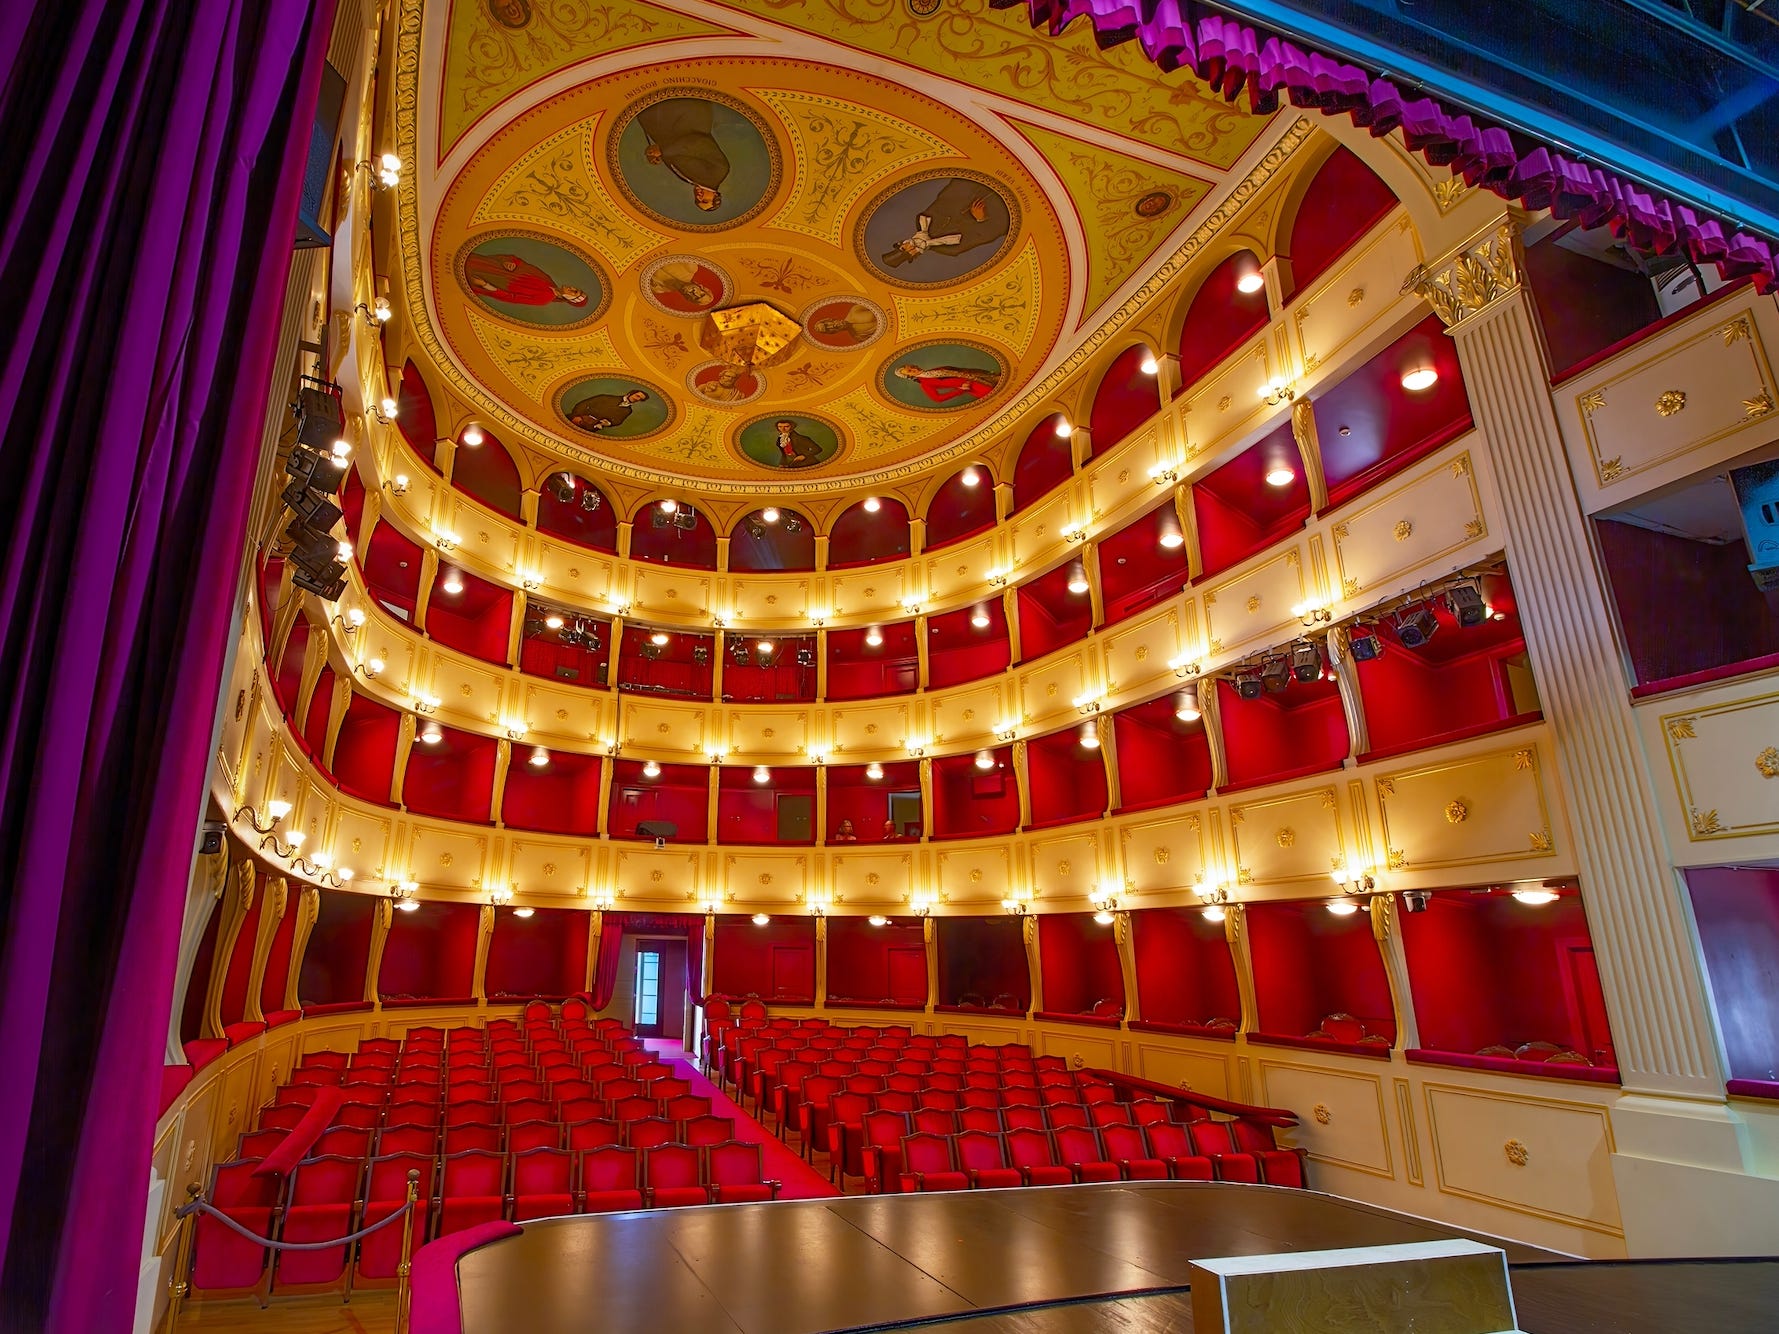 <p><span>Designed as a miniature version of the La Scala opera house in Milan, Apollon Theater hosts shows and performances on the island. </span></p><p><span>It's also one of the many reasons Syros is considered an island of the arts. Each year, the venue hosts multiple events, including an </span><a href="https://www.businessinsider.com/margot-robbie-emma-stone-palm-springs-film-awards-red-carpet-photos-2024-1"><span>international film festival</span></a><span>.</span></p>